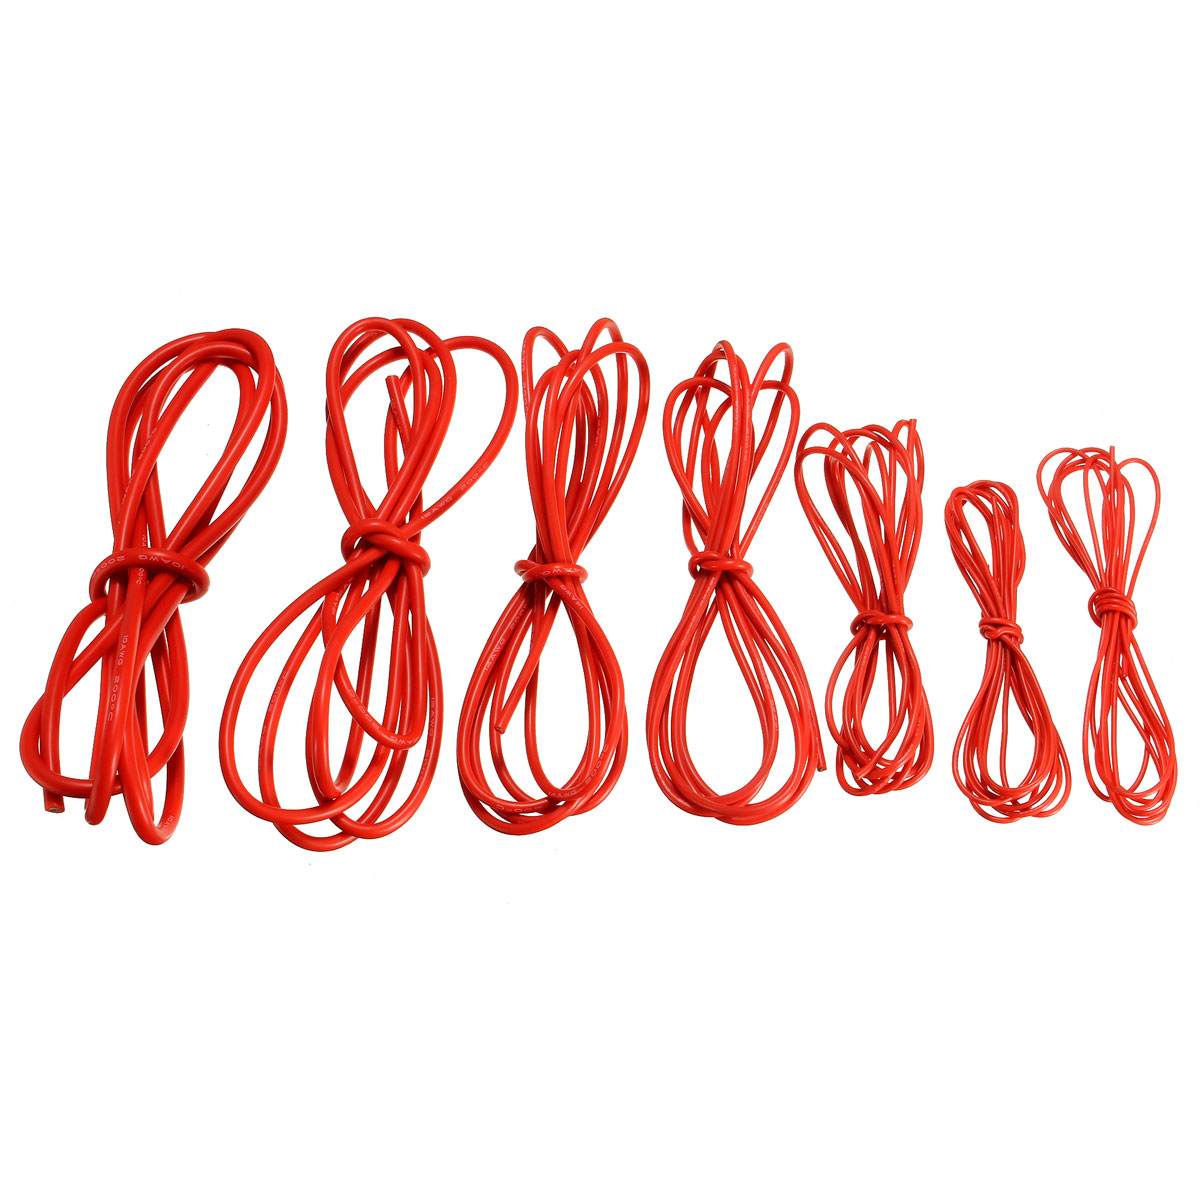 DANIU-2-Meter-Red-Silicone-Wire-Cable-10121416182022AWG-Flexible-Cable-1170284-1